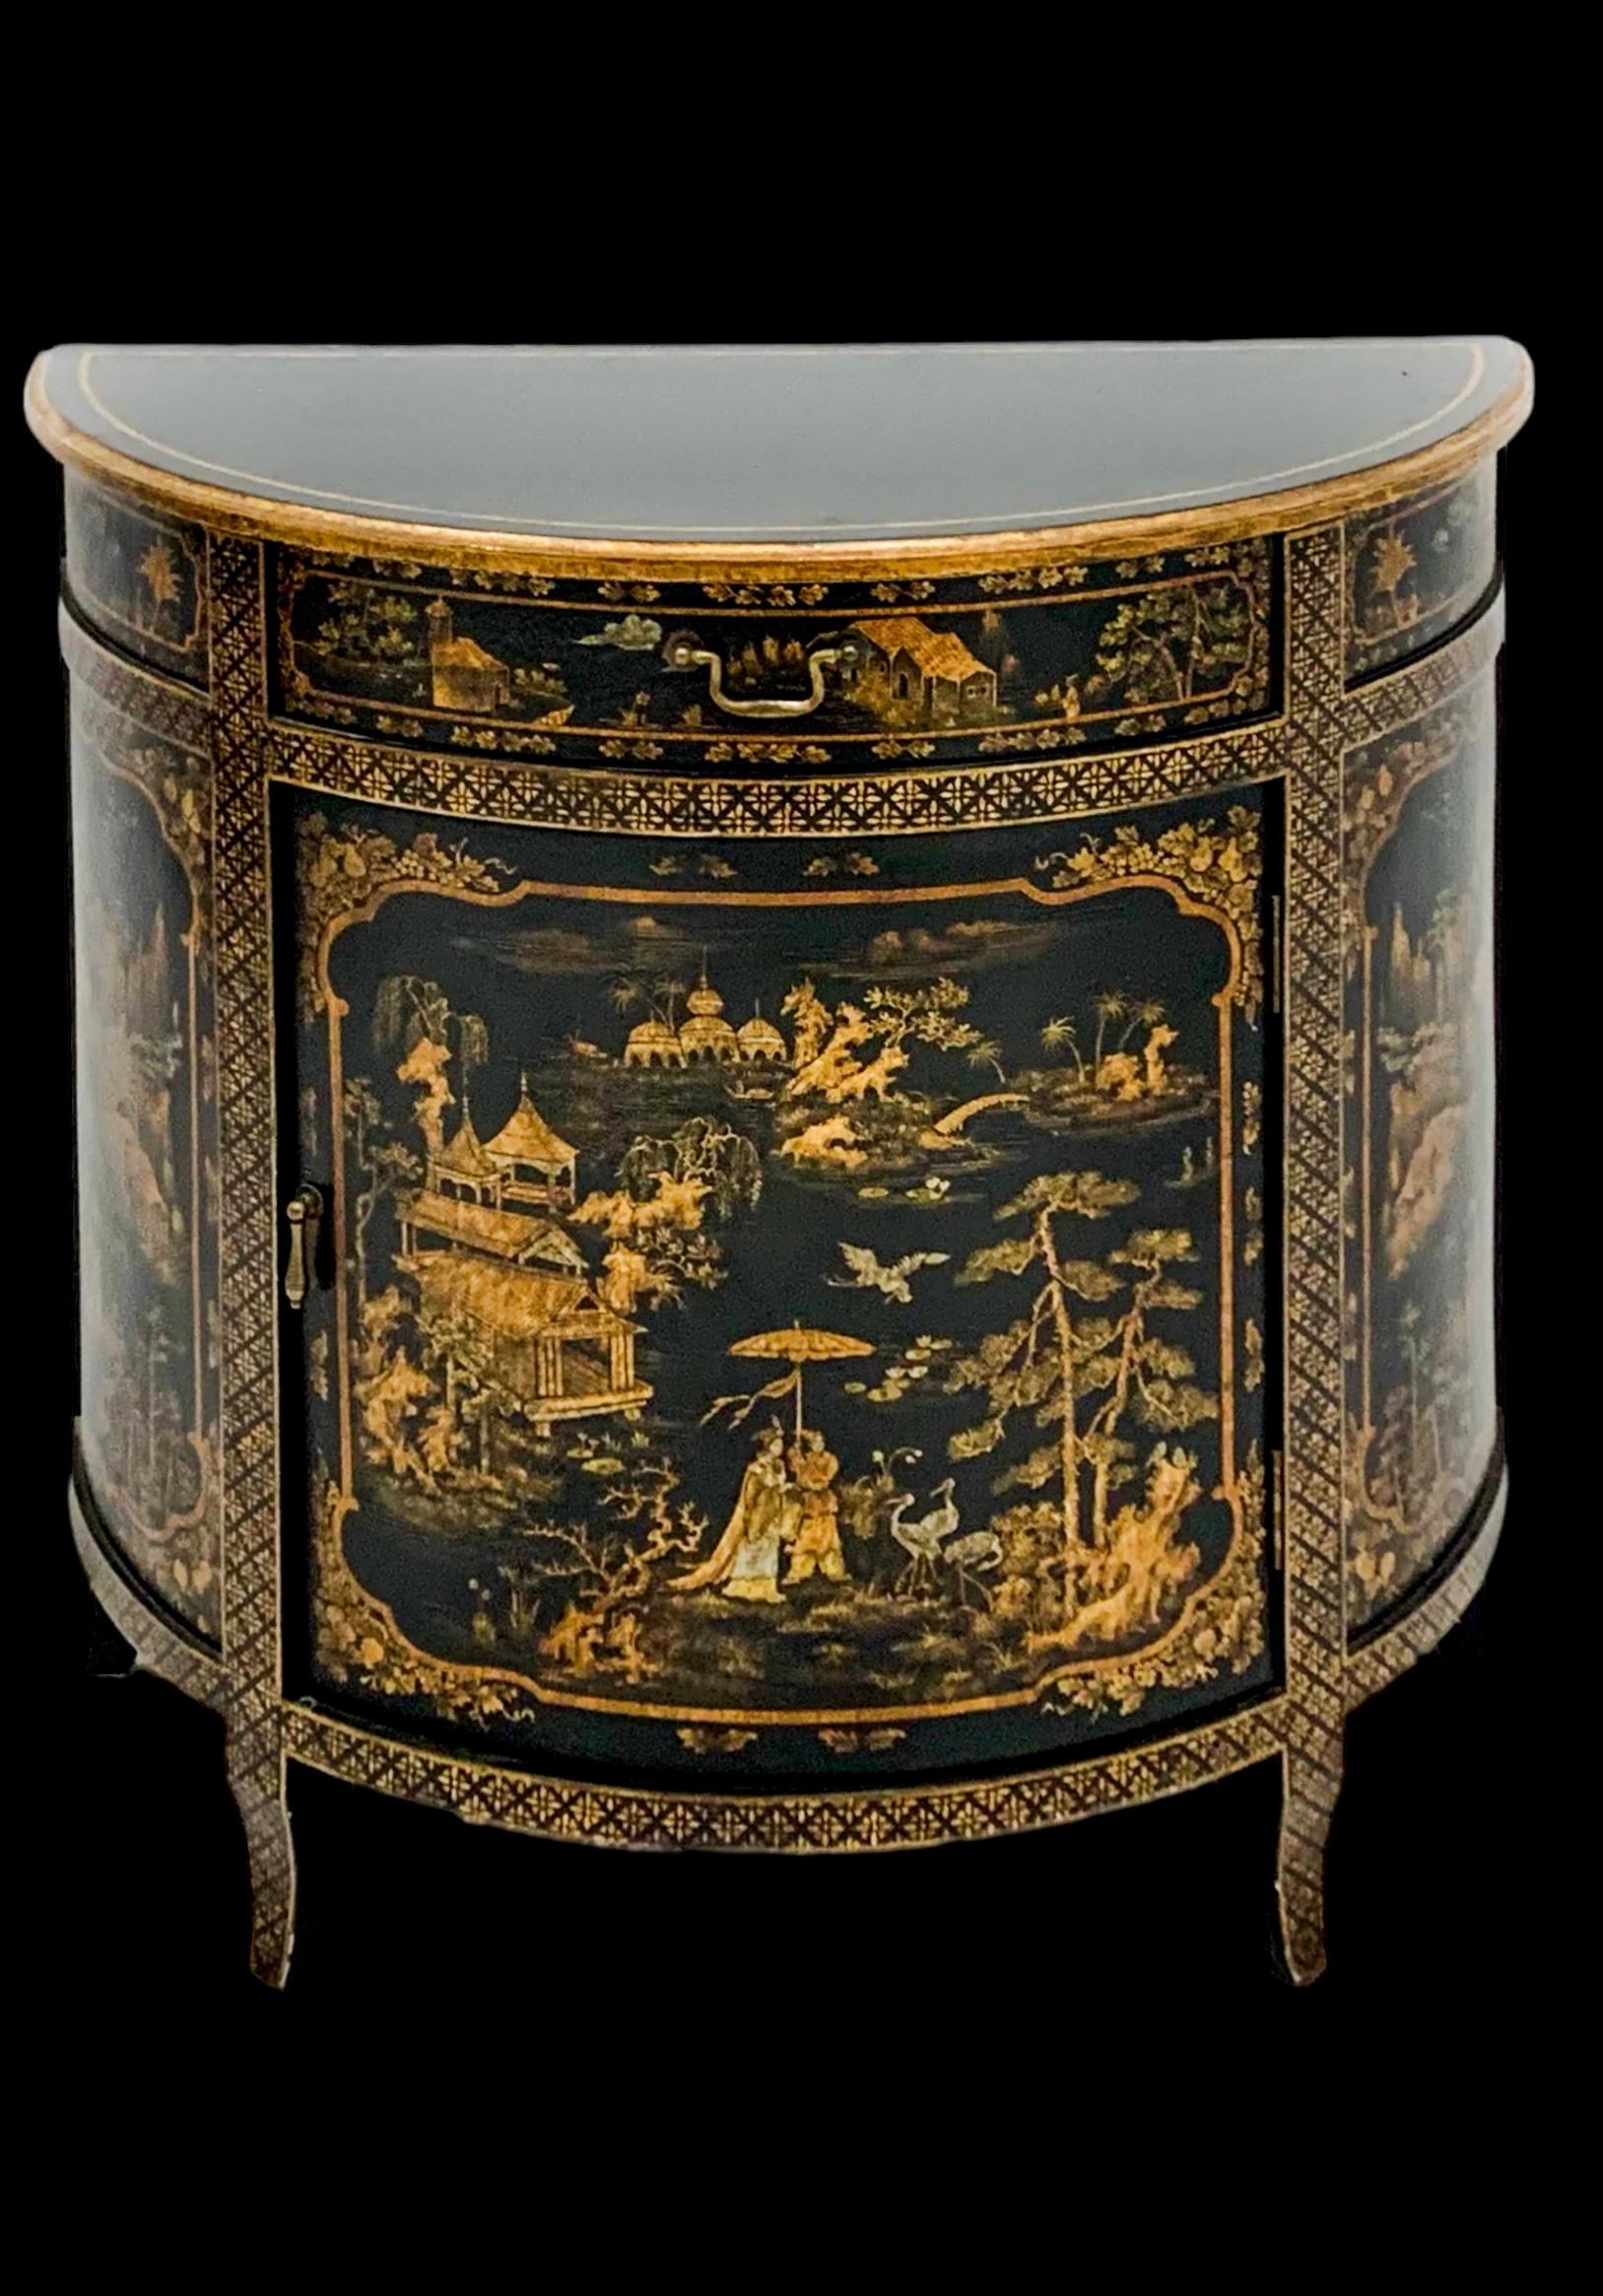 20th Century Italian Chinoiserie Black Lacquer & Gilt Demilune Cabinet By Decorative Crafts